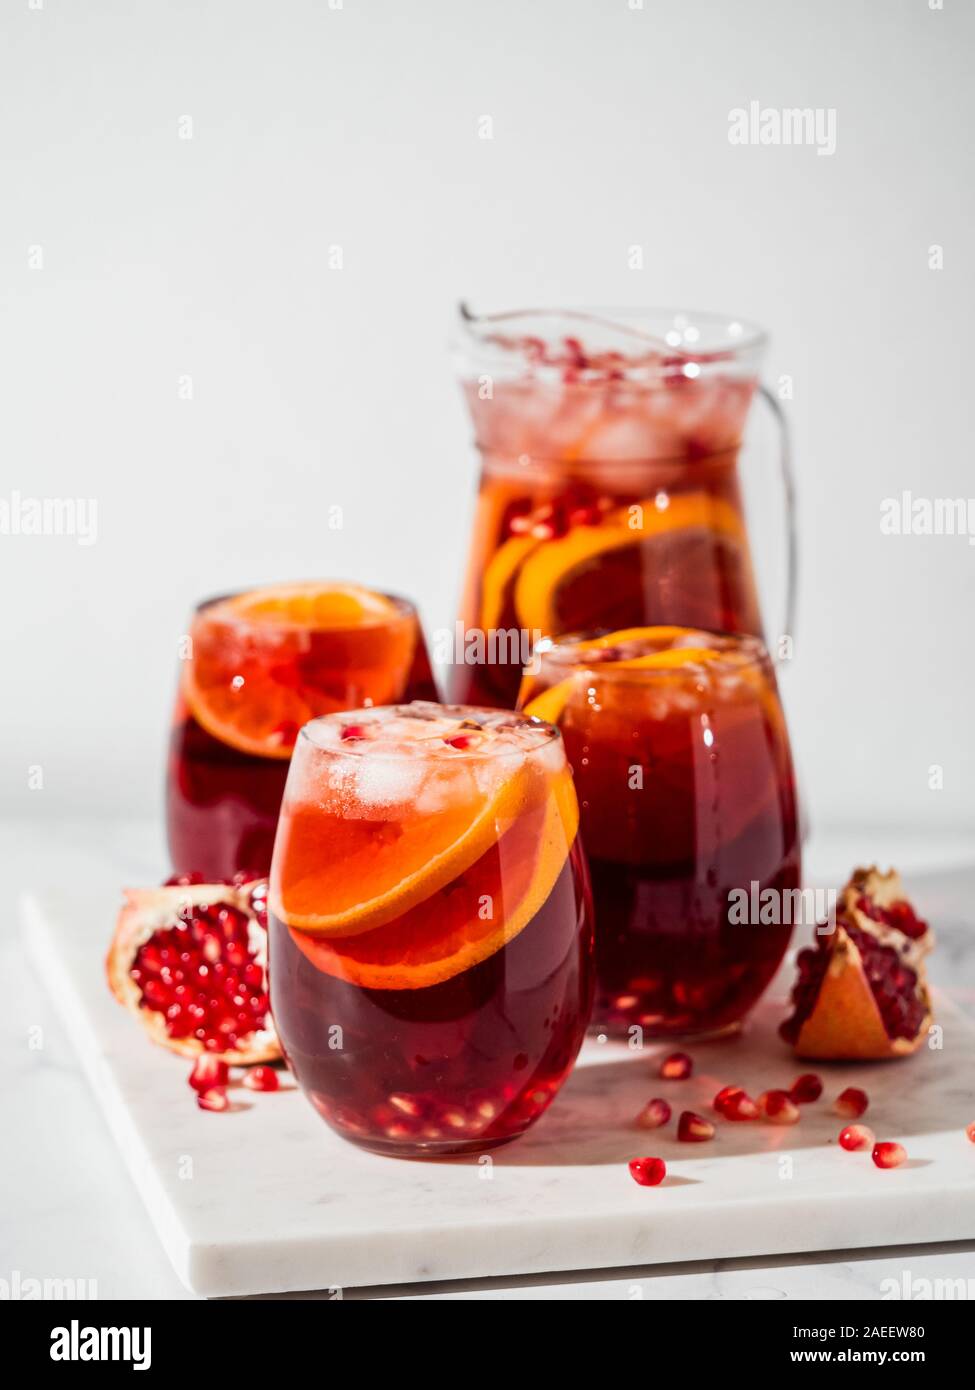 Winter sangria on white marble background. Jugful of sangria and glasses with orange slice and pomegranate. Copy space for text or design. Vertical. Stock Photo